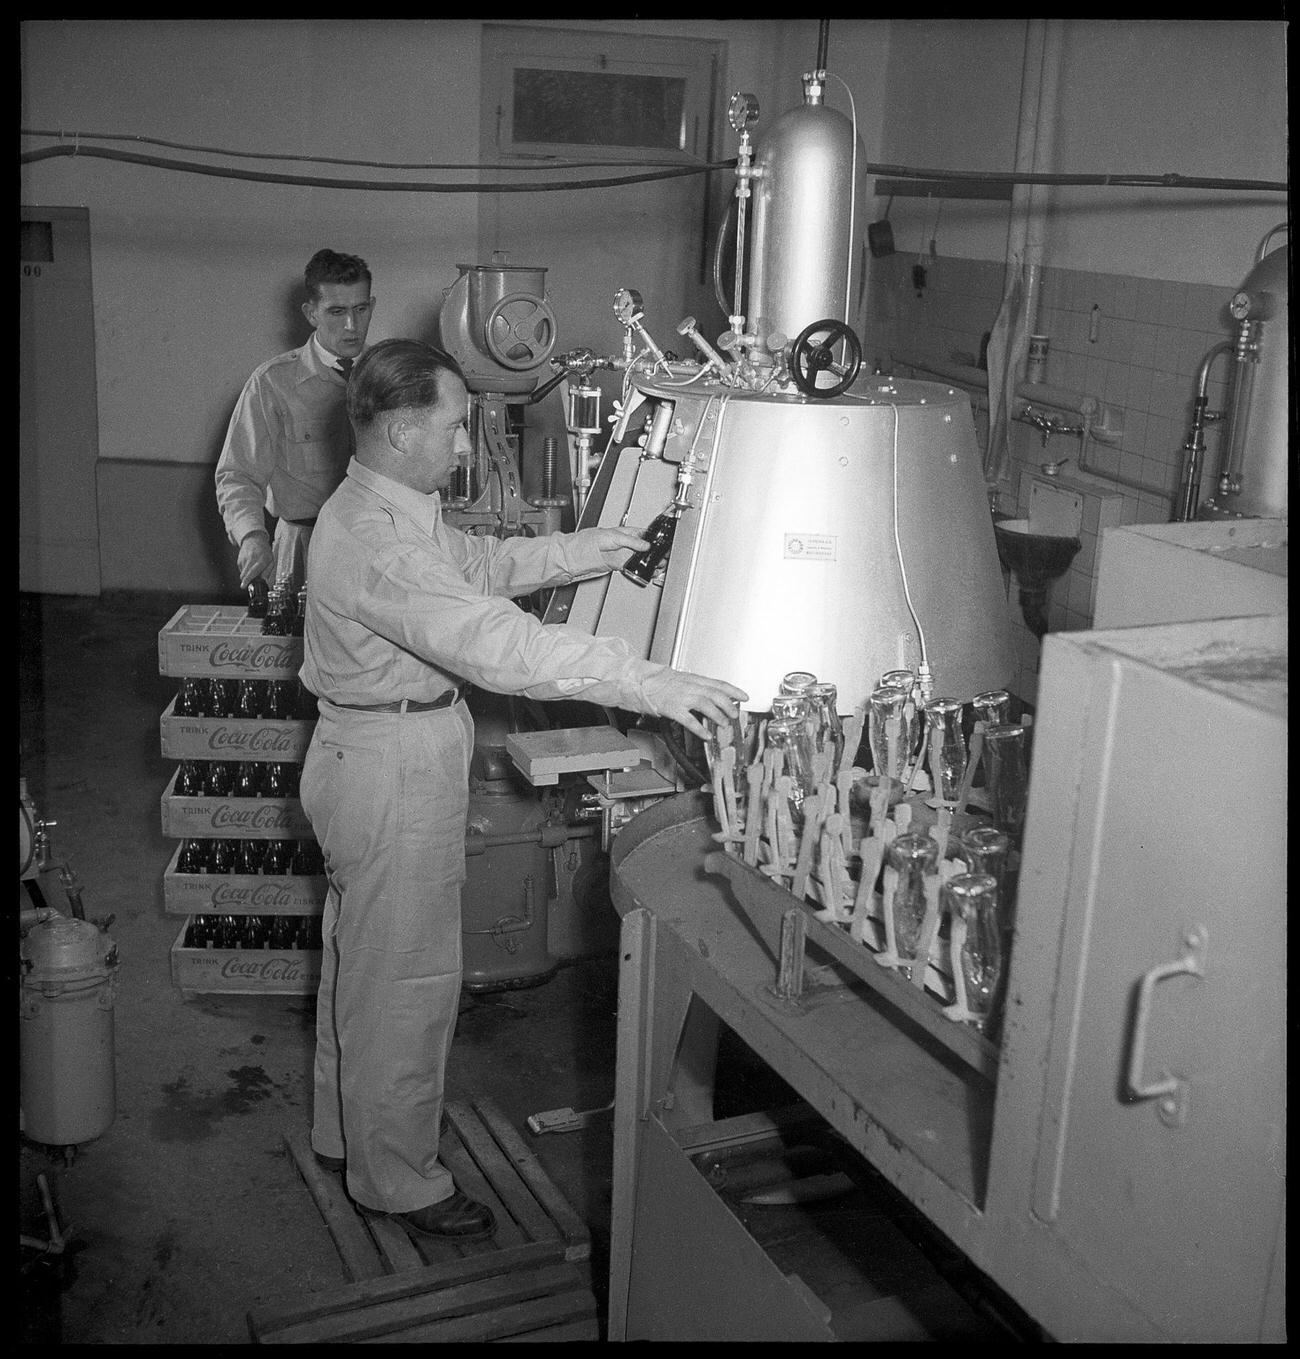 Coca-Cola worker at a bottling plant with a bottle, 1949.